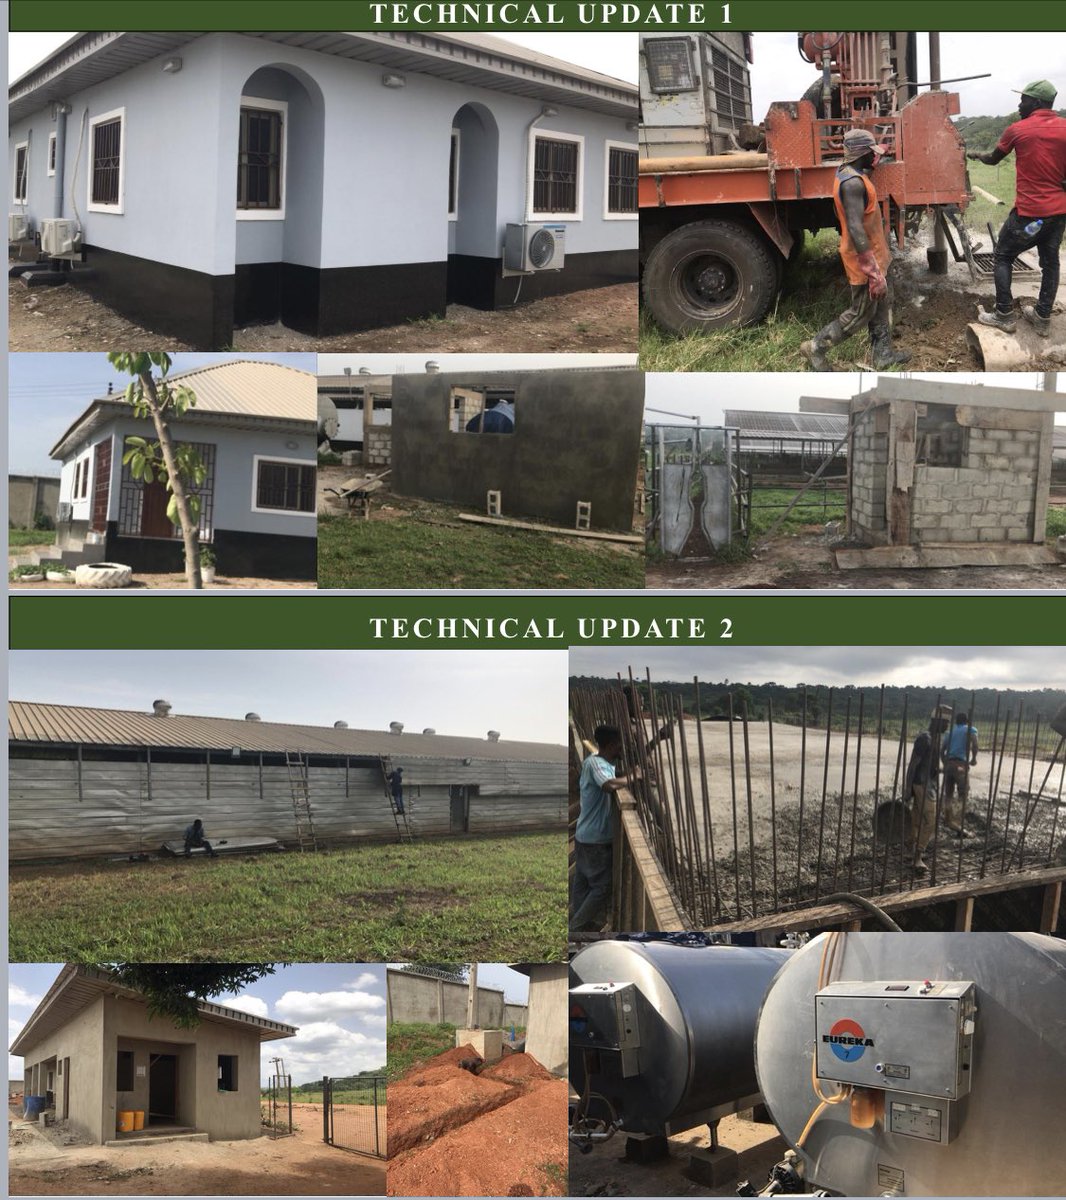 Our JV entity has also repaired the farm houses; procured equipment for the farm, and started hiring staff from the community. Time to show we can create wage employment from agriculture. :)